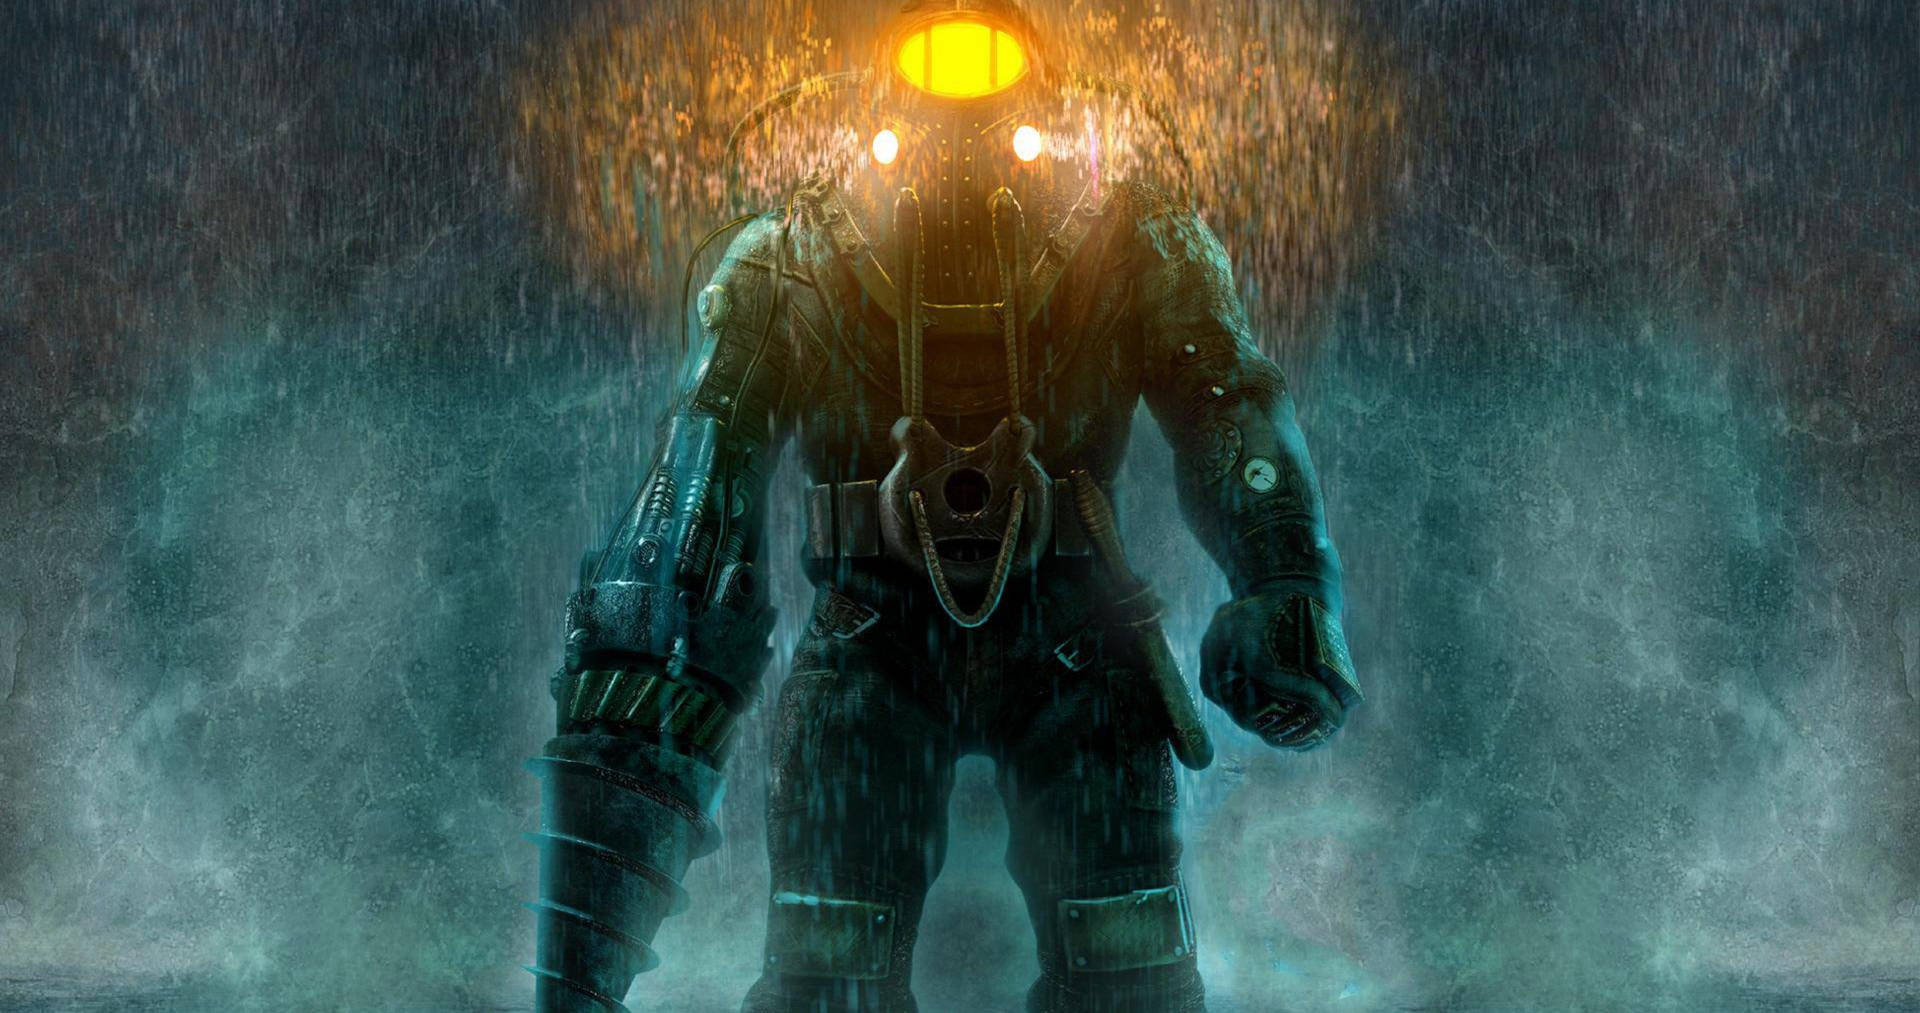 Bioshock 4096X2160 Wallpaper and Background Image